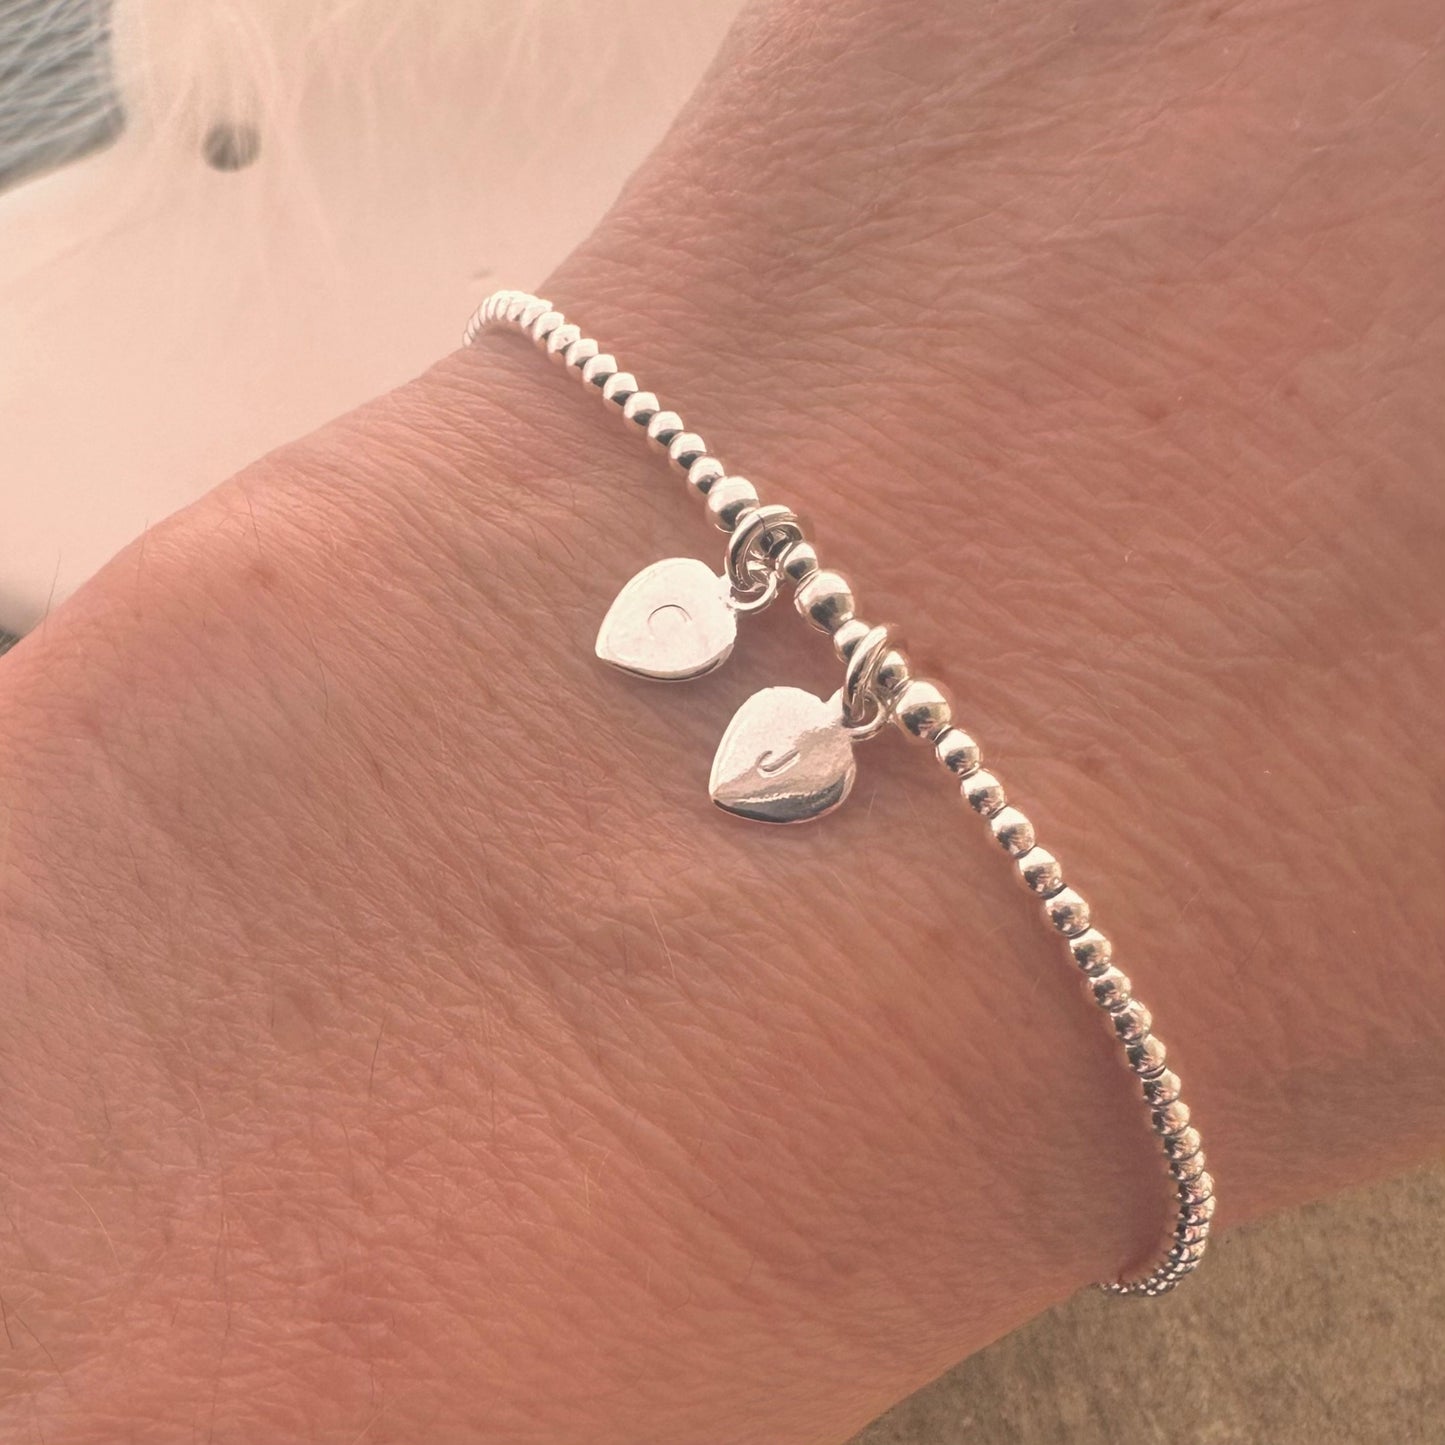 Two Initials Valentines Day Bracelet in Sterling Silver, His and Hers Initial Bracelet